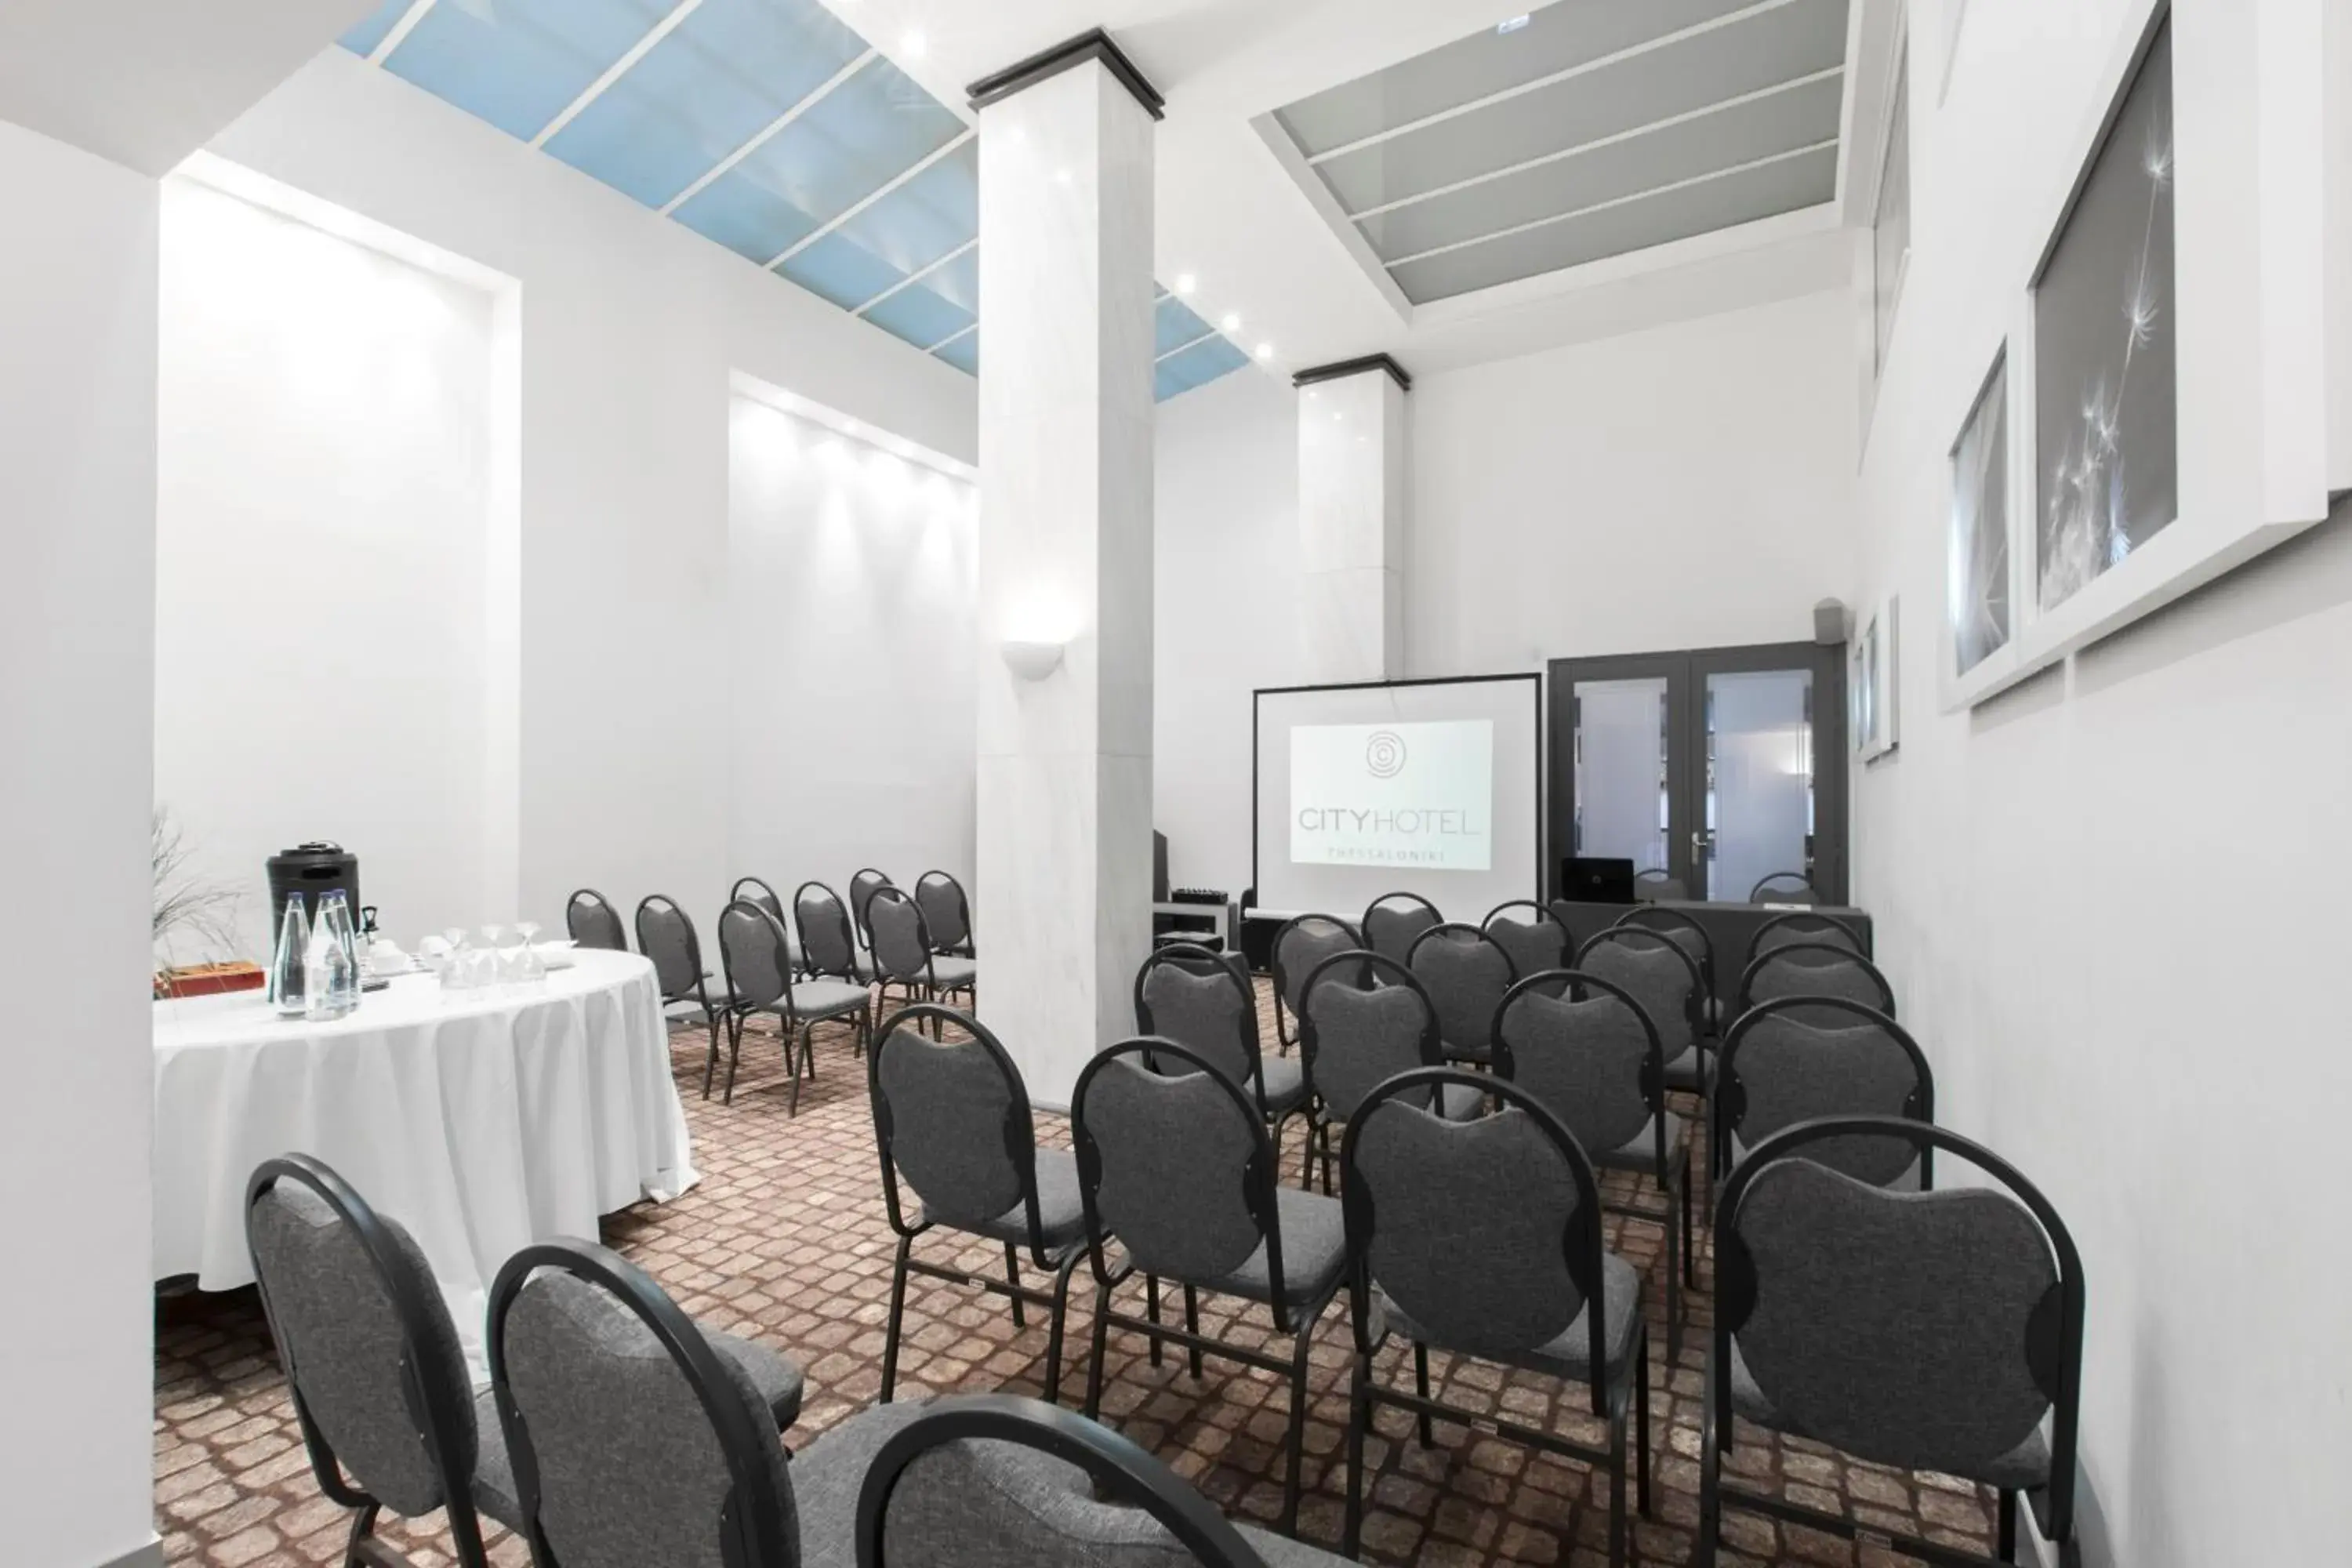 Meeting/conference room in City Hotel Thessaloniki